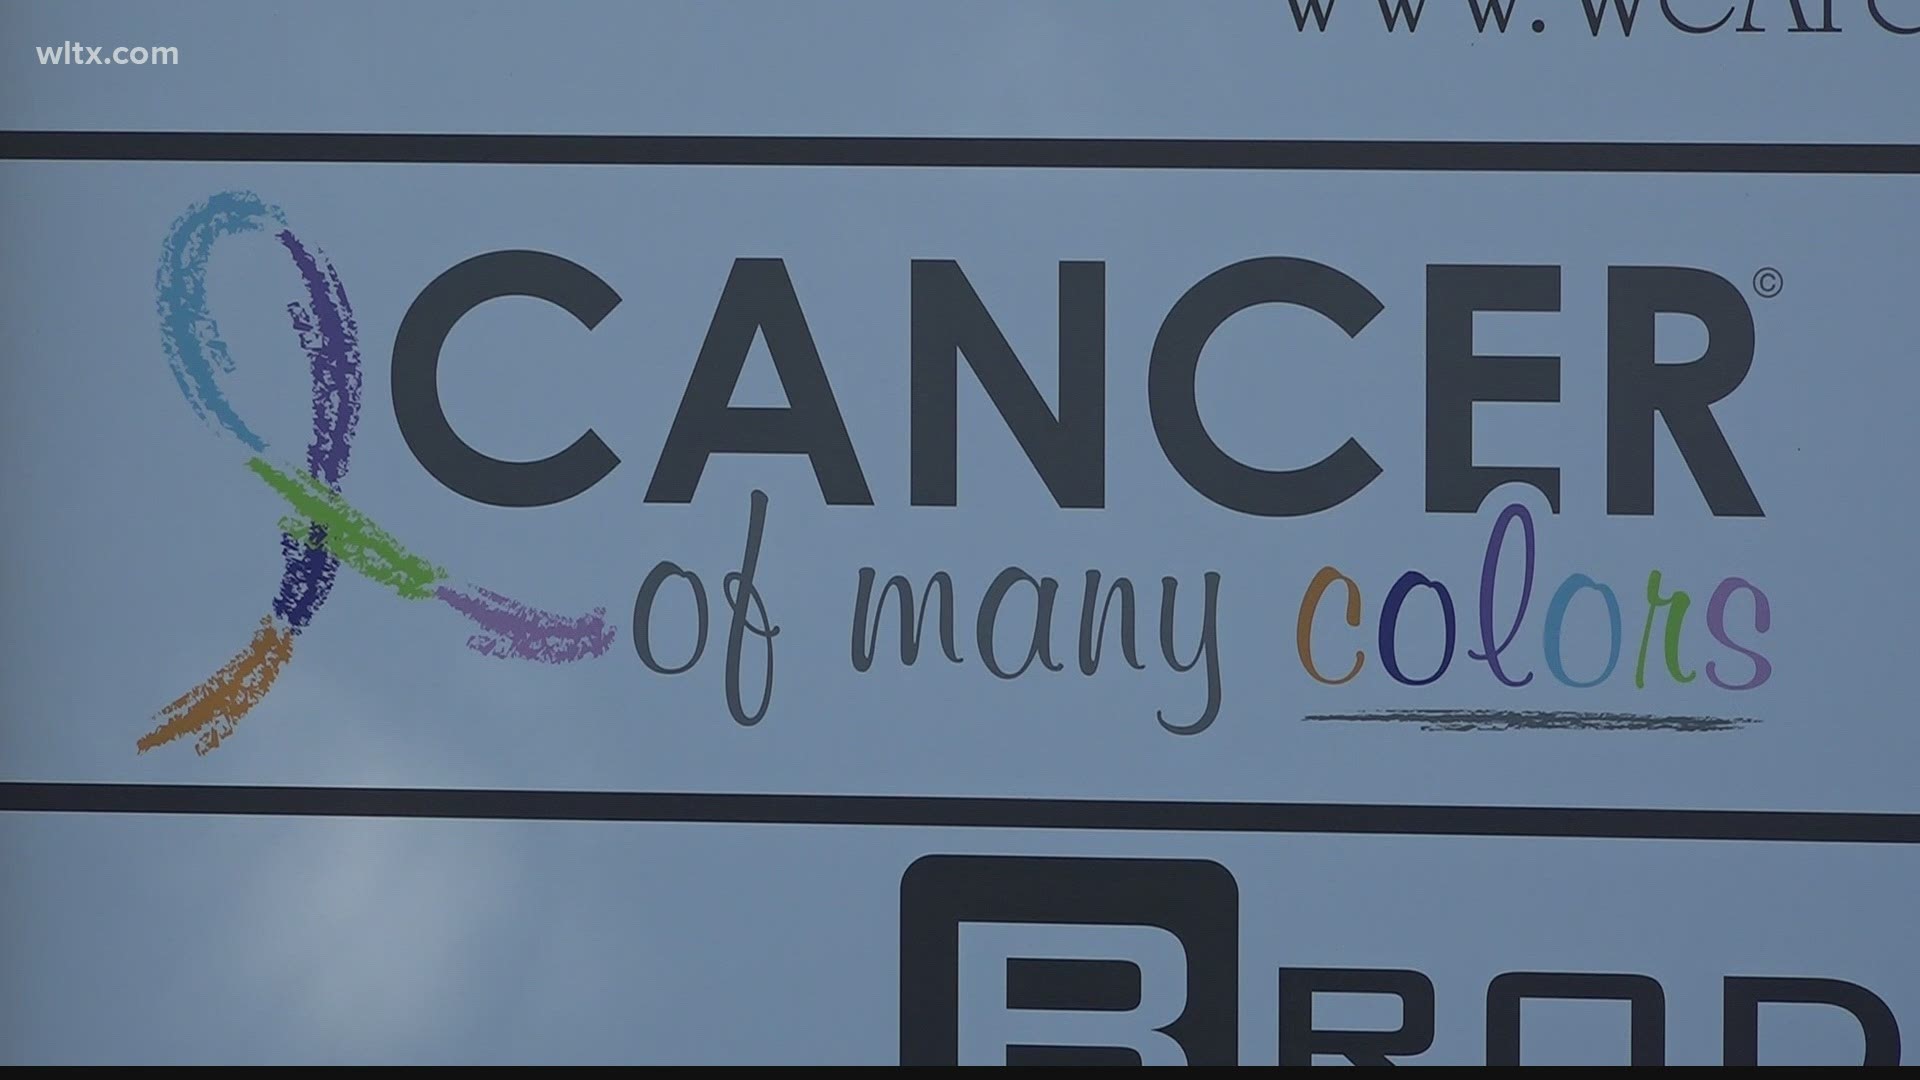 Students at Lexington High School are helping a non-profit called "Cancer of Many Colors"